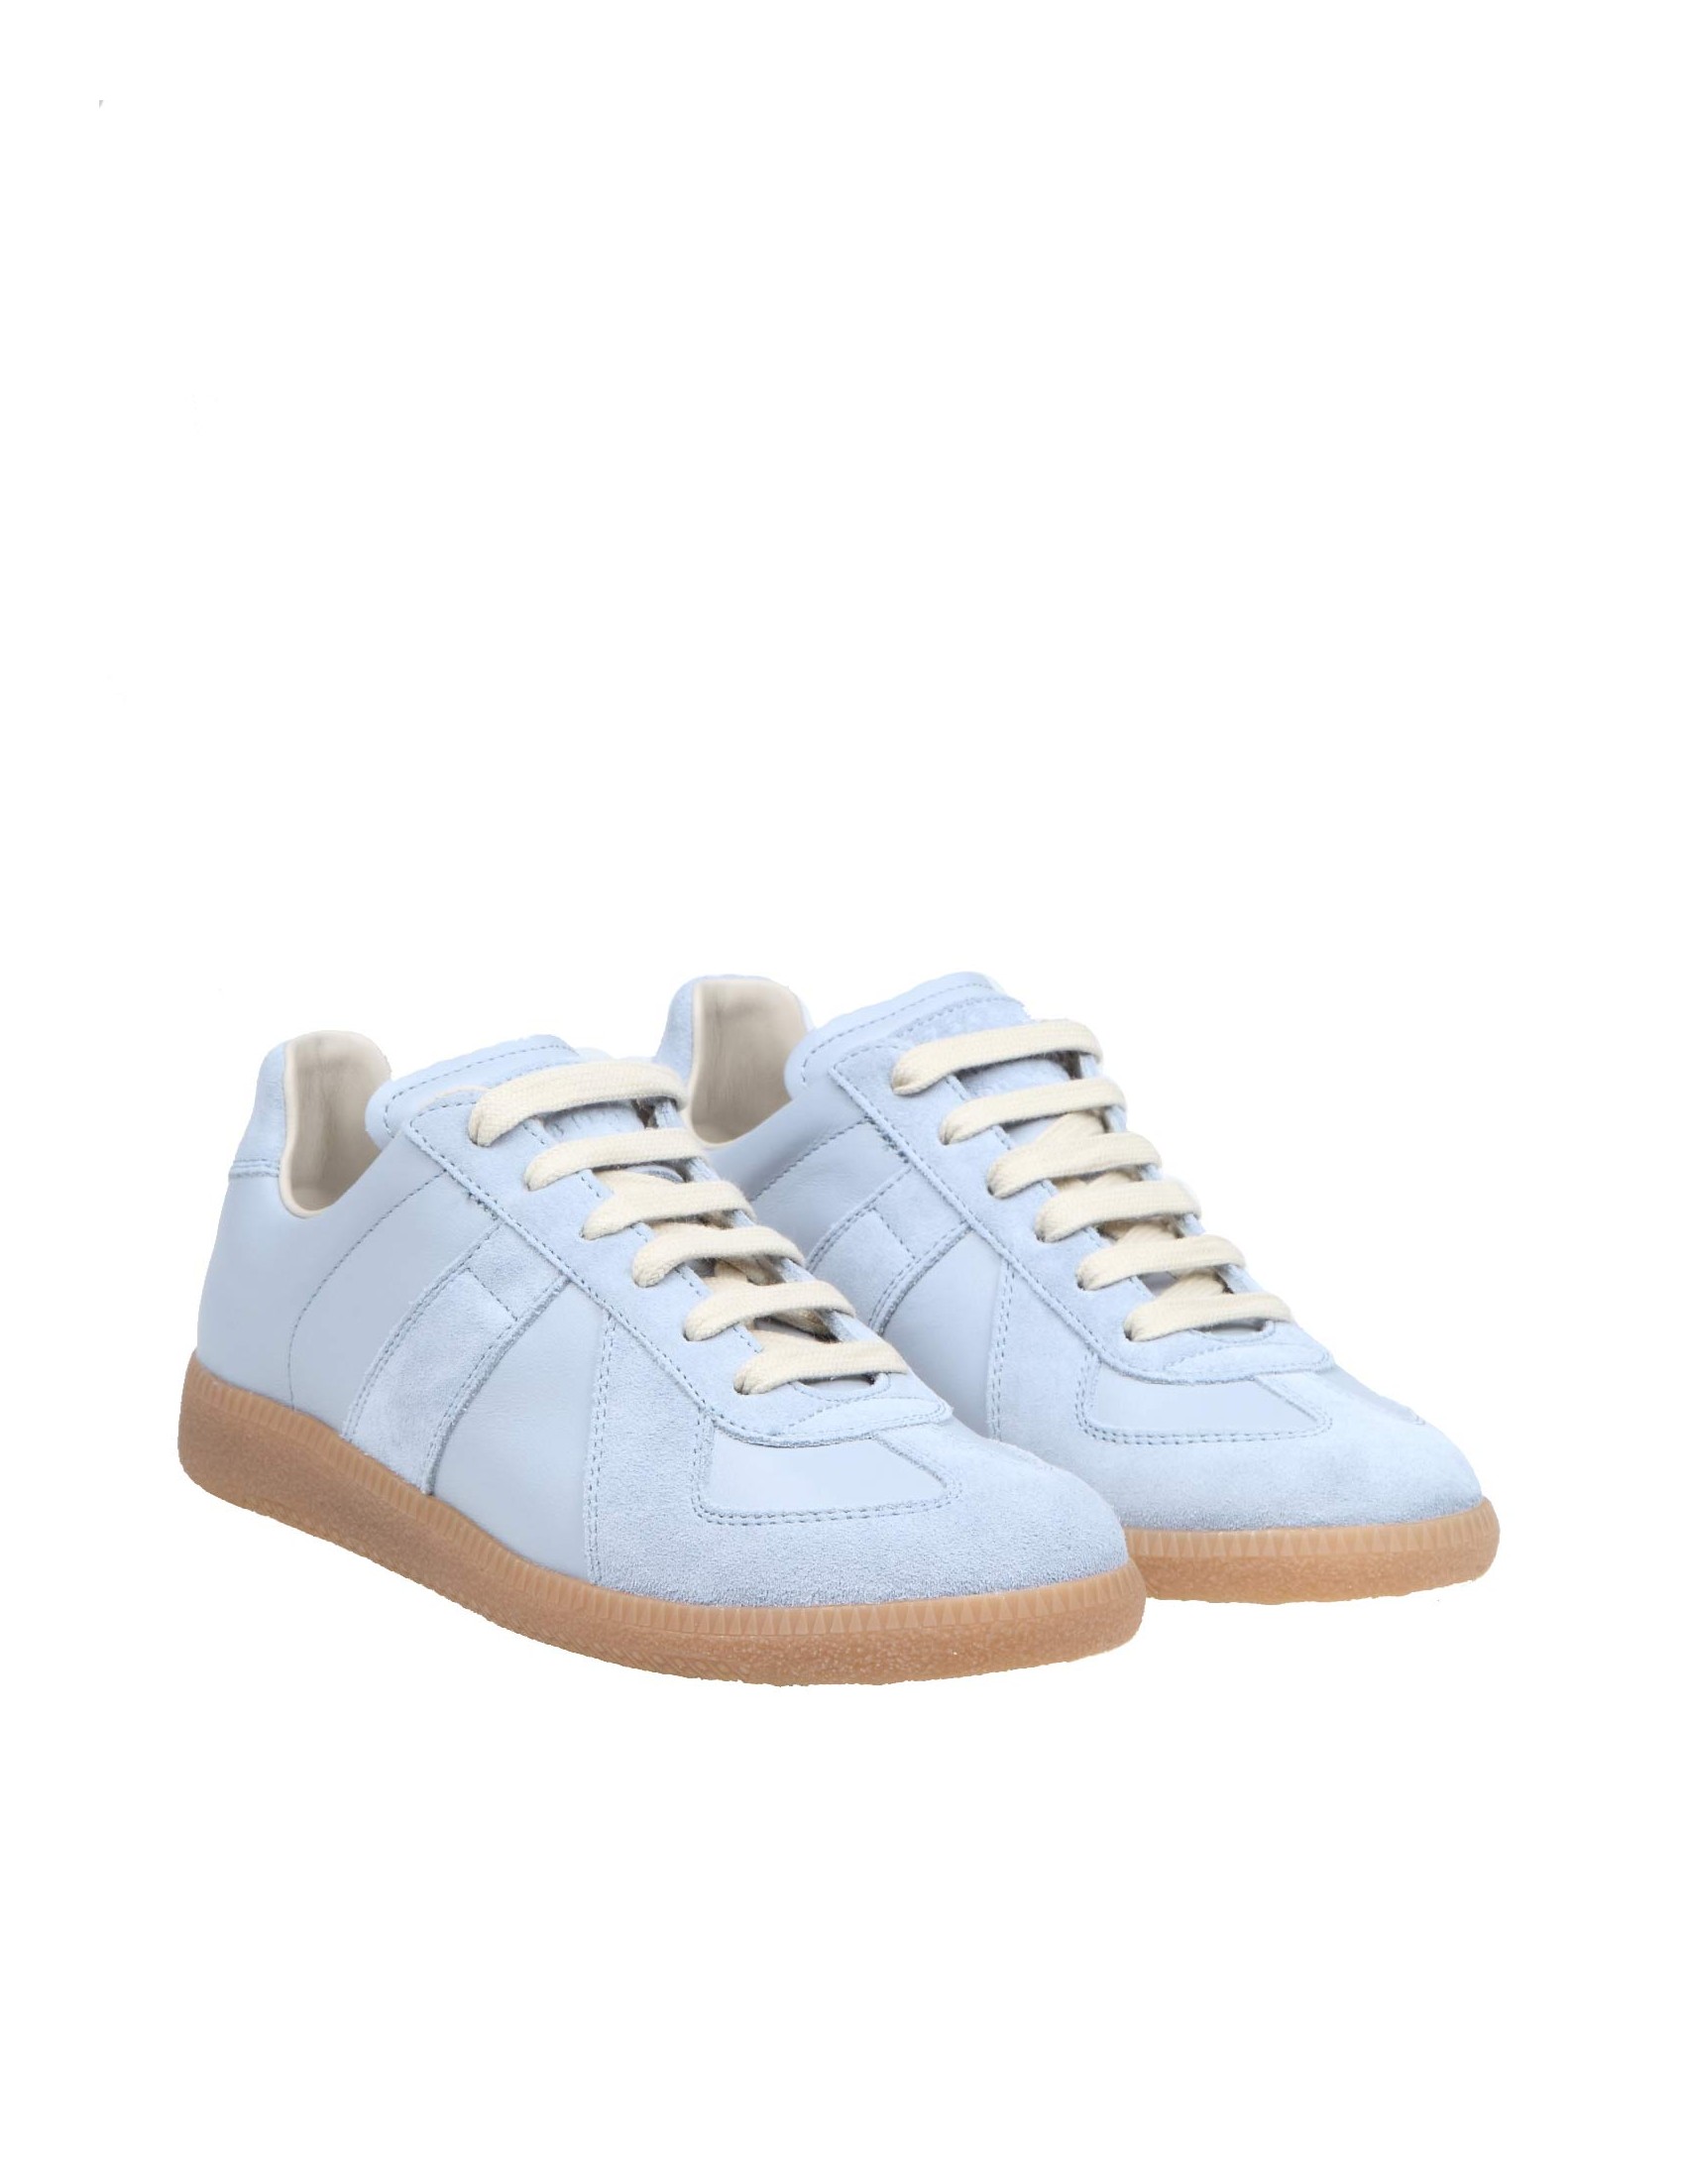 MAISON MARGIELA REPLICA SNEAKERS IN LEATHER AND SUEDE